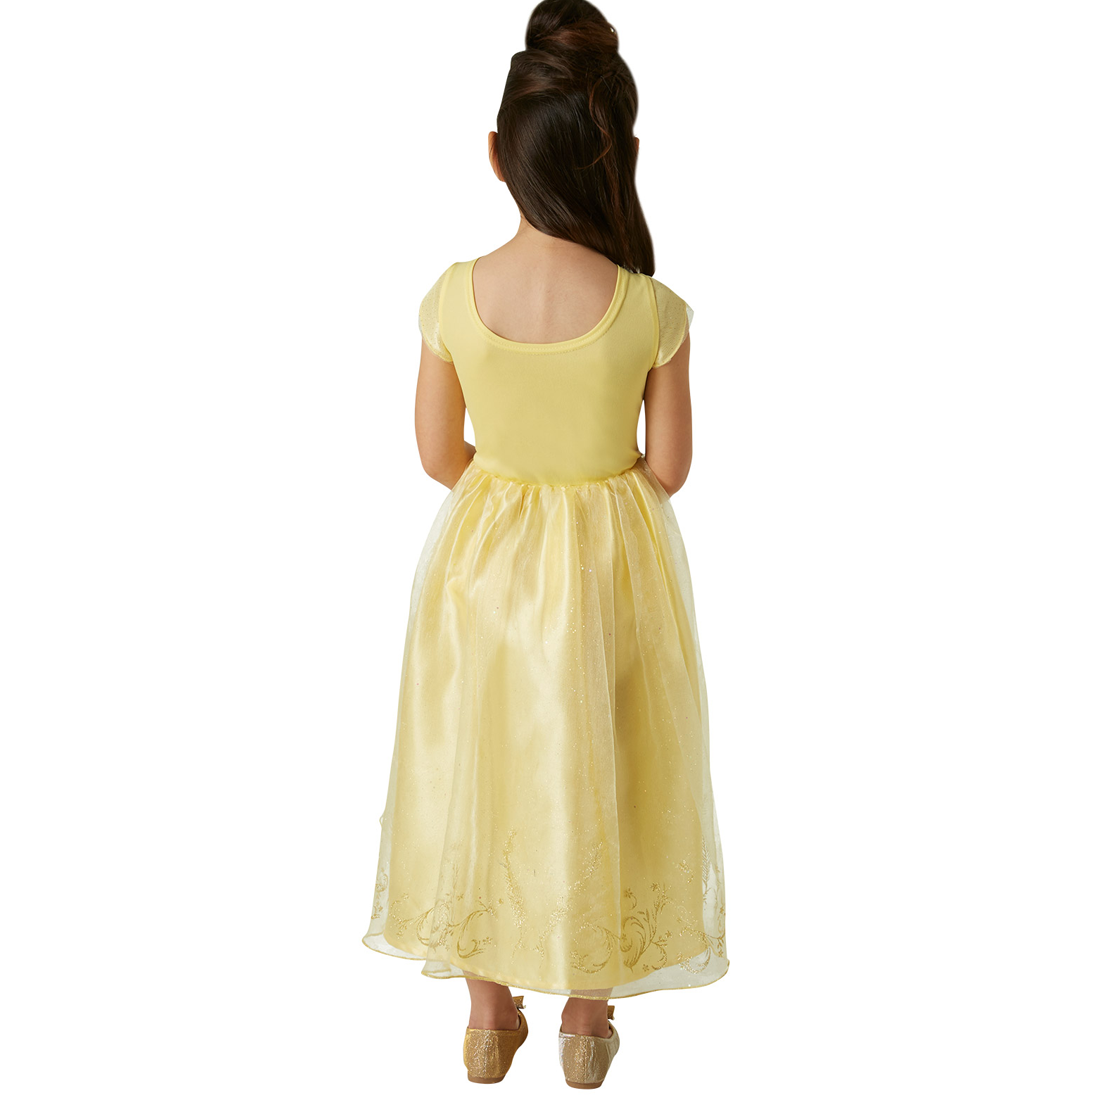 Belle Live Action Deluxe Child Costume